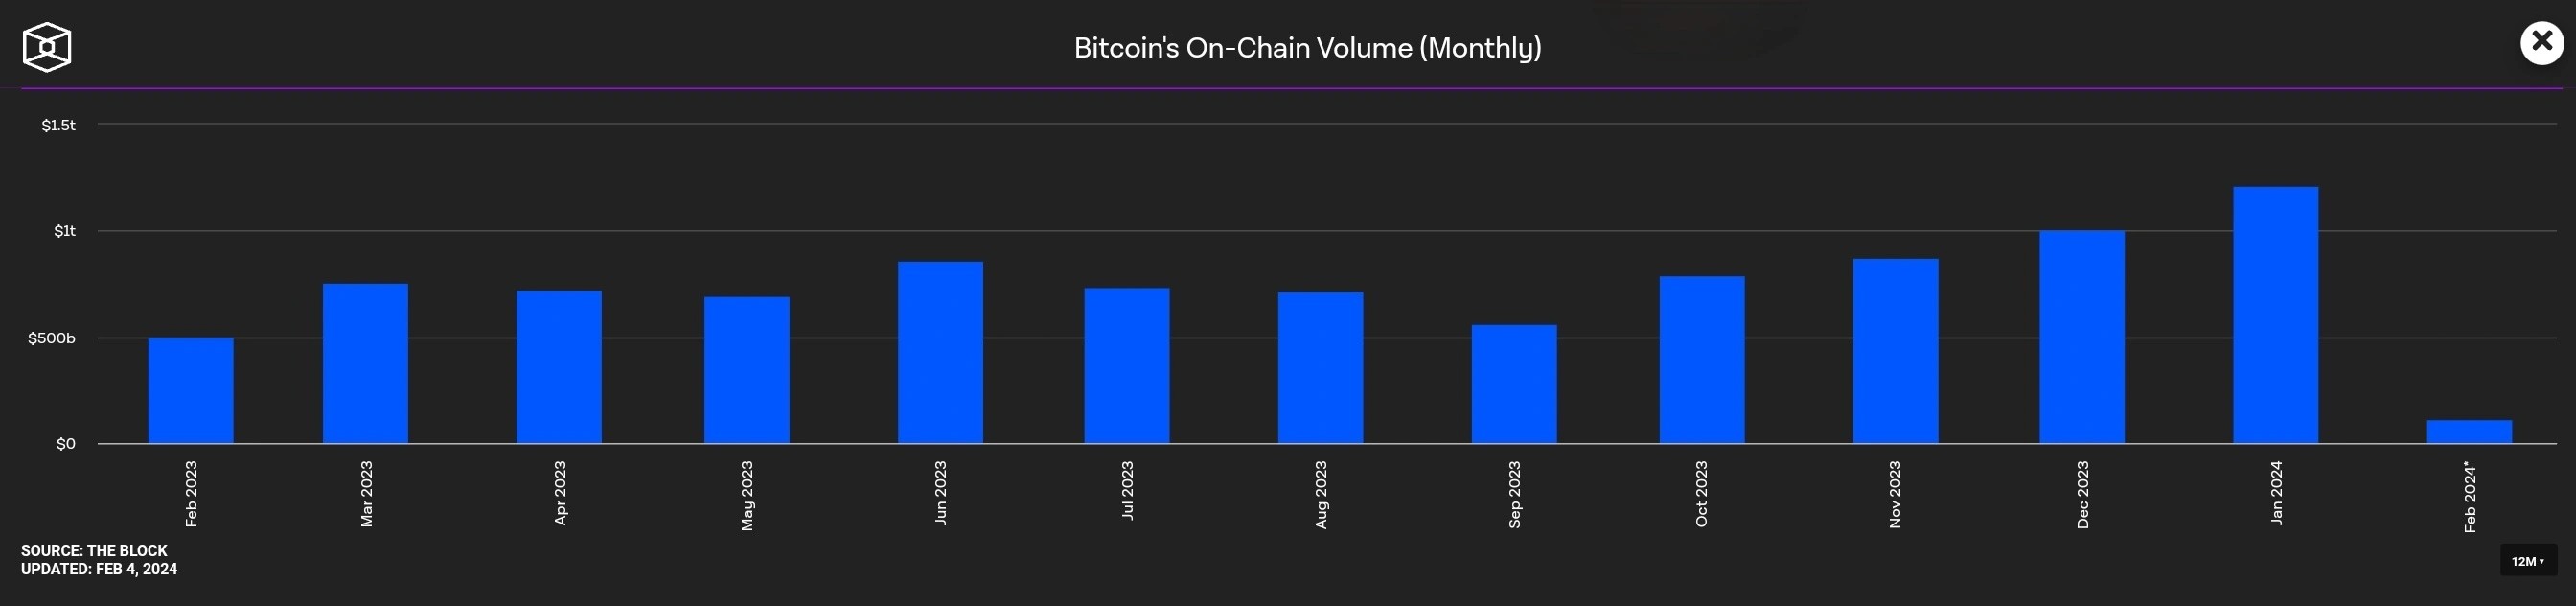 Image showing bitcoin onchain volume by charts